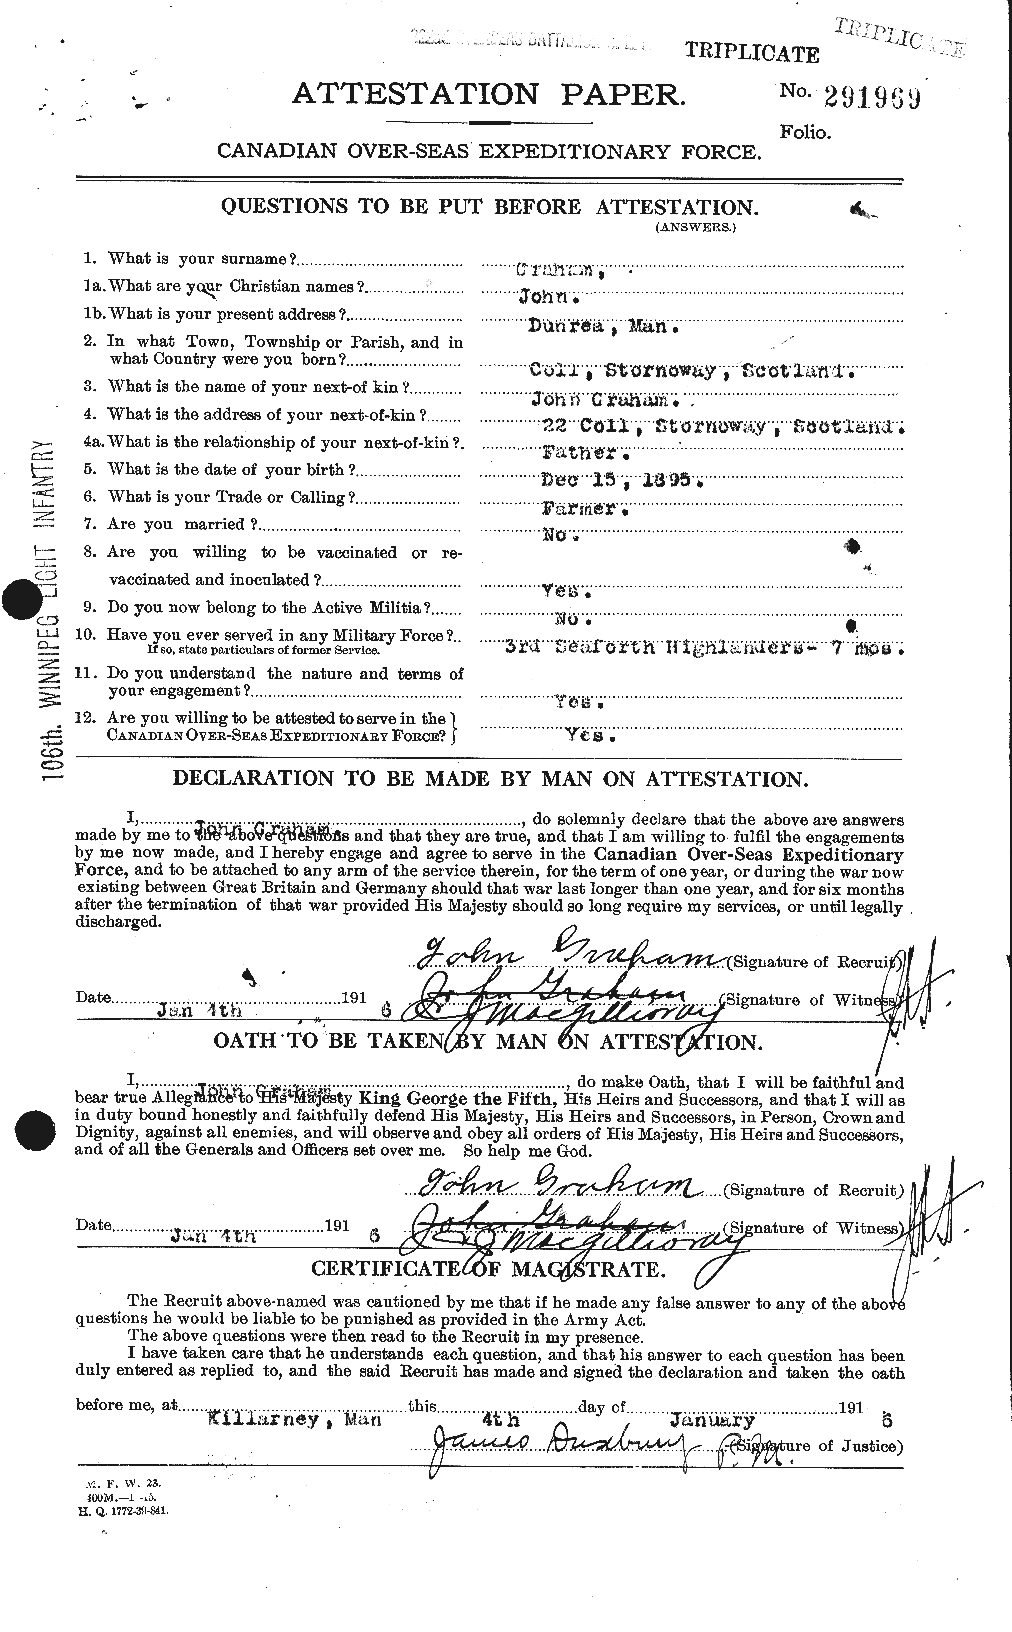 Personnel Records of the First World War - CEF 359130a